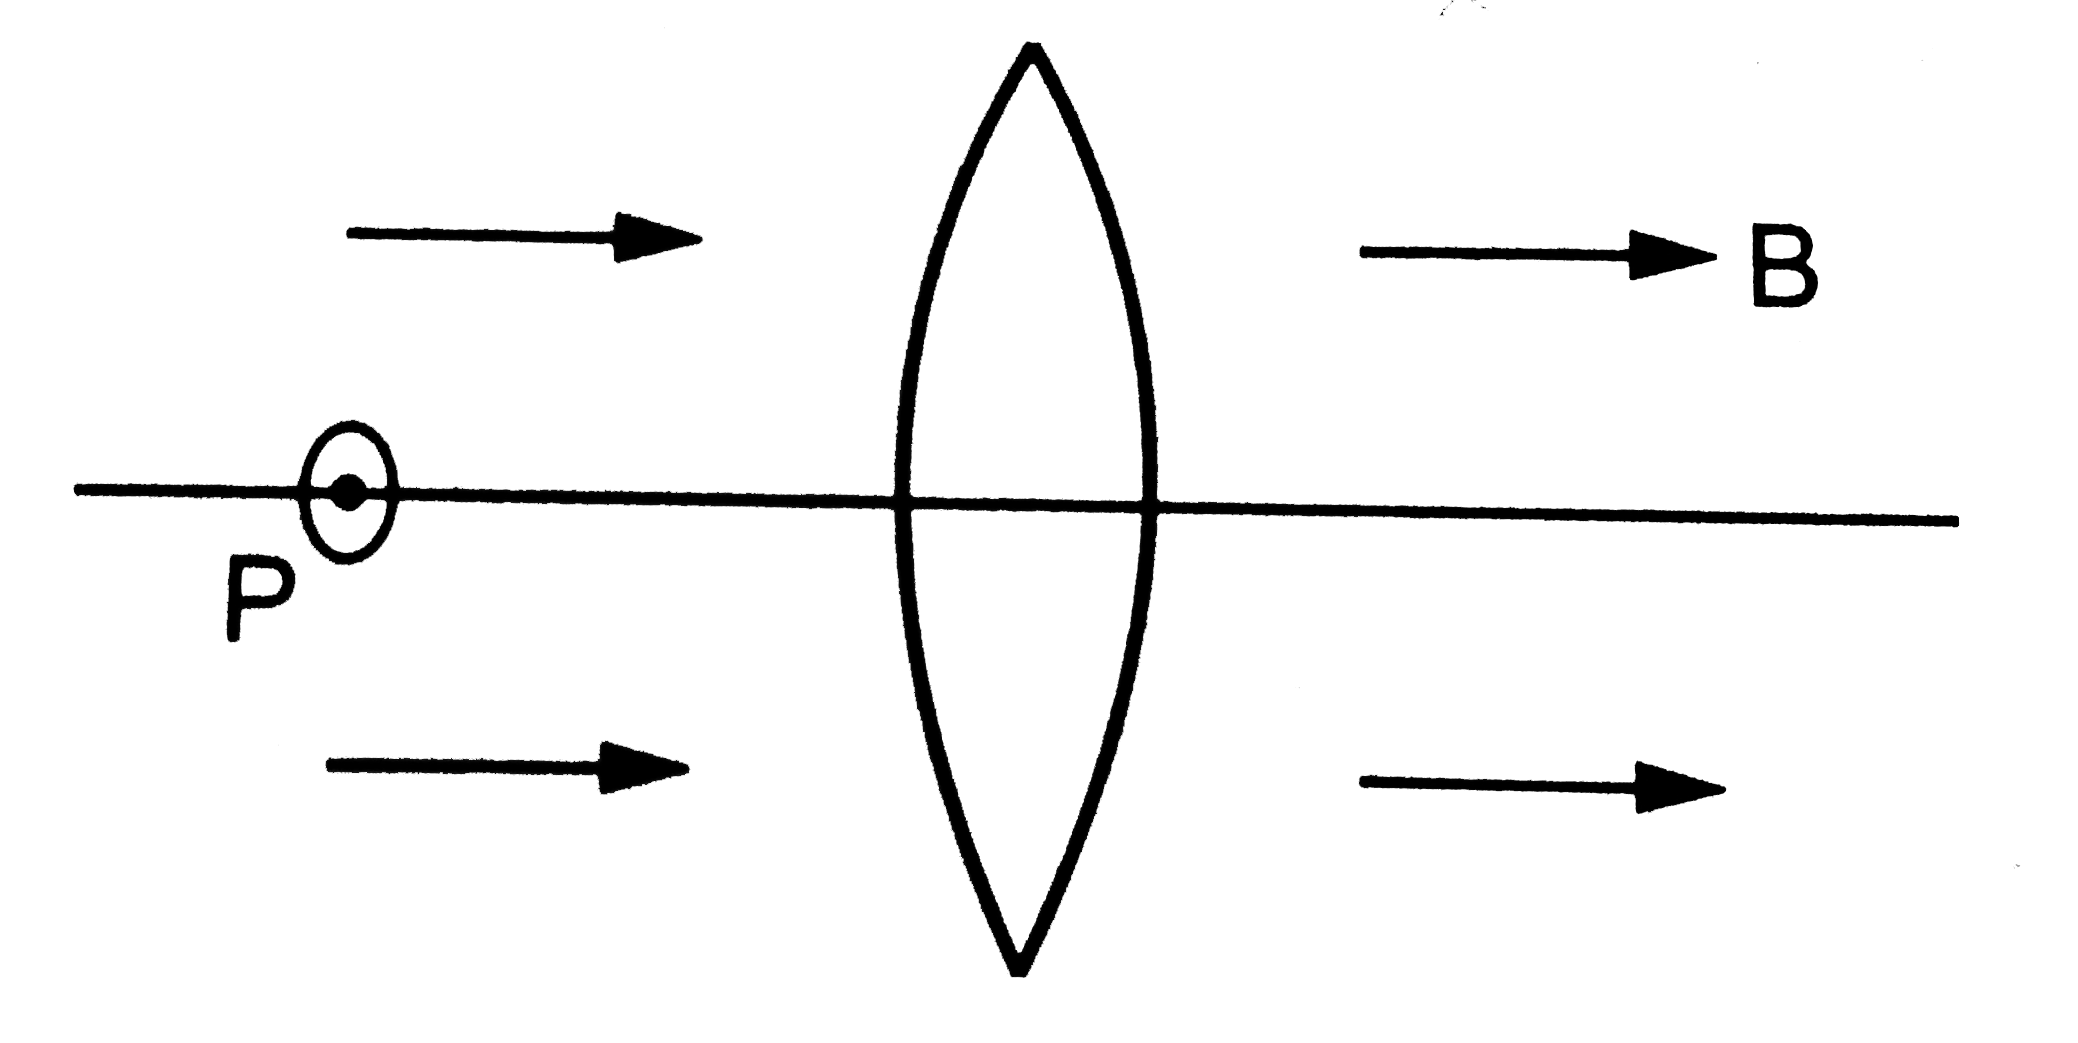 Shows a convex  lens of focal length 12 cm lying in a uniform magnetic field B of  magnitude 1.2 T parallel to  its principal axis. A particle having a charge 2.0X 10^(-3) C and  mass 2.0 X 10^(-5)  kg is projected perpendiucular to the plane of the diagram with a speed of 4.8 ms ^(-1). The particle moves along a circle with its centre on the principal axis at a distance of 18 cm from the lens. Show that the image of the particle goes along a circle end find the radius of thet circle.